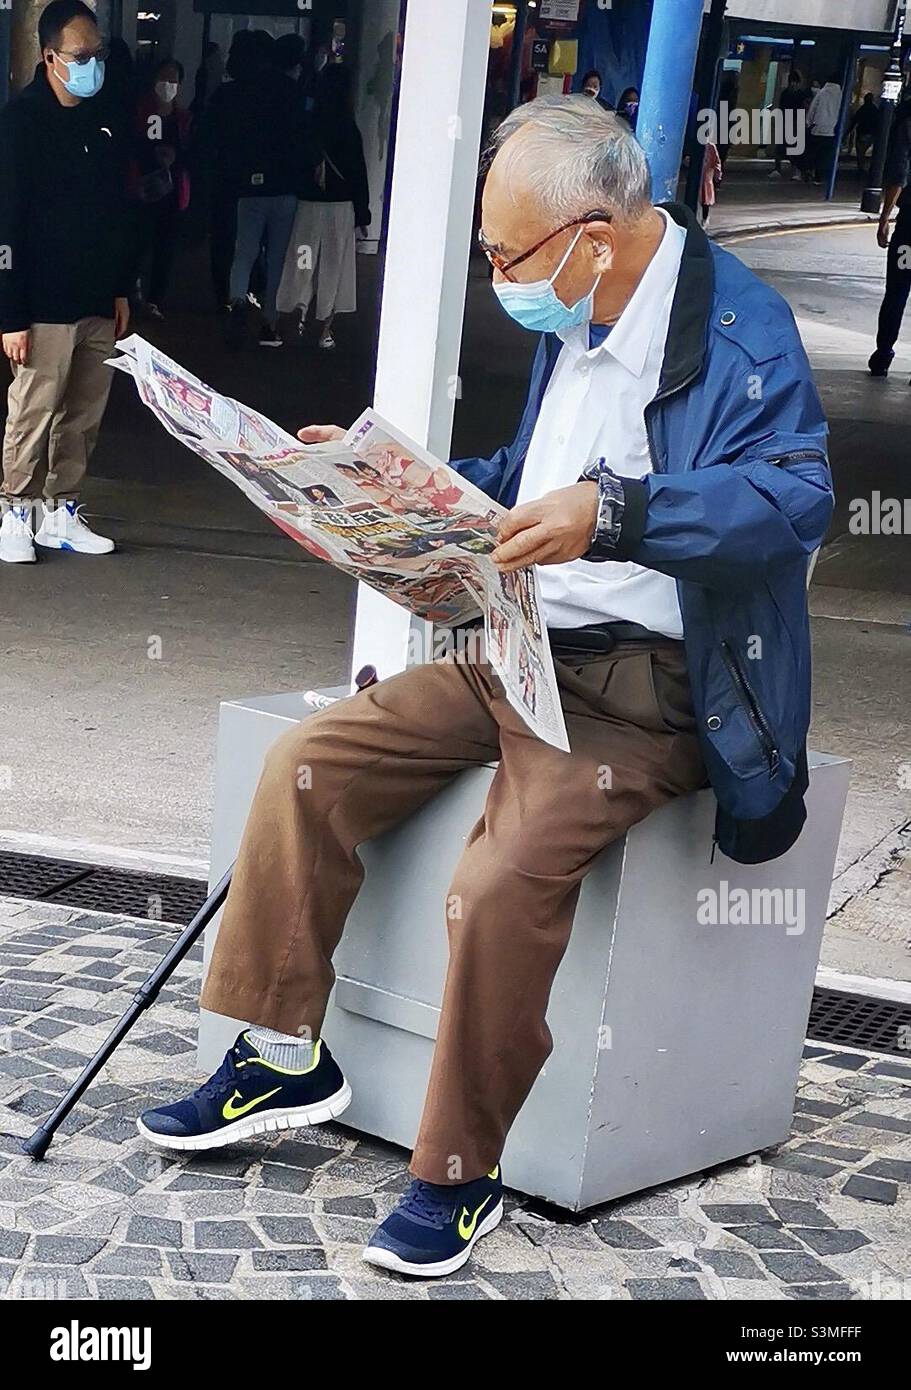 Reading the newspaper while wearing a surgical mask during the Covid-19 pandemic in Hong Kong. Stock Photo